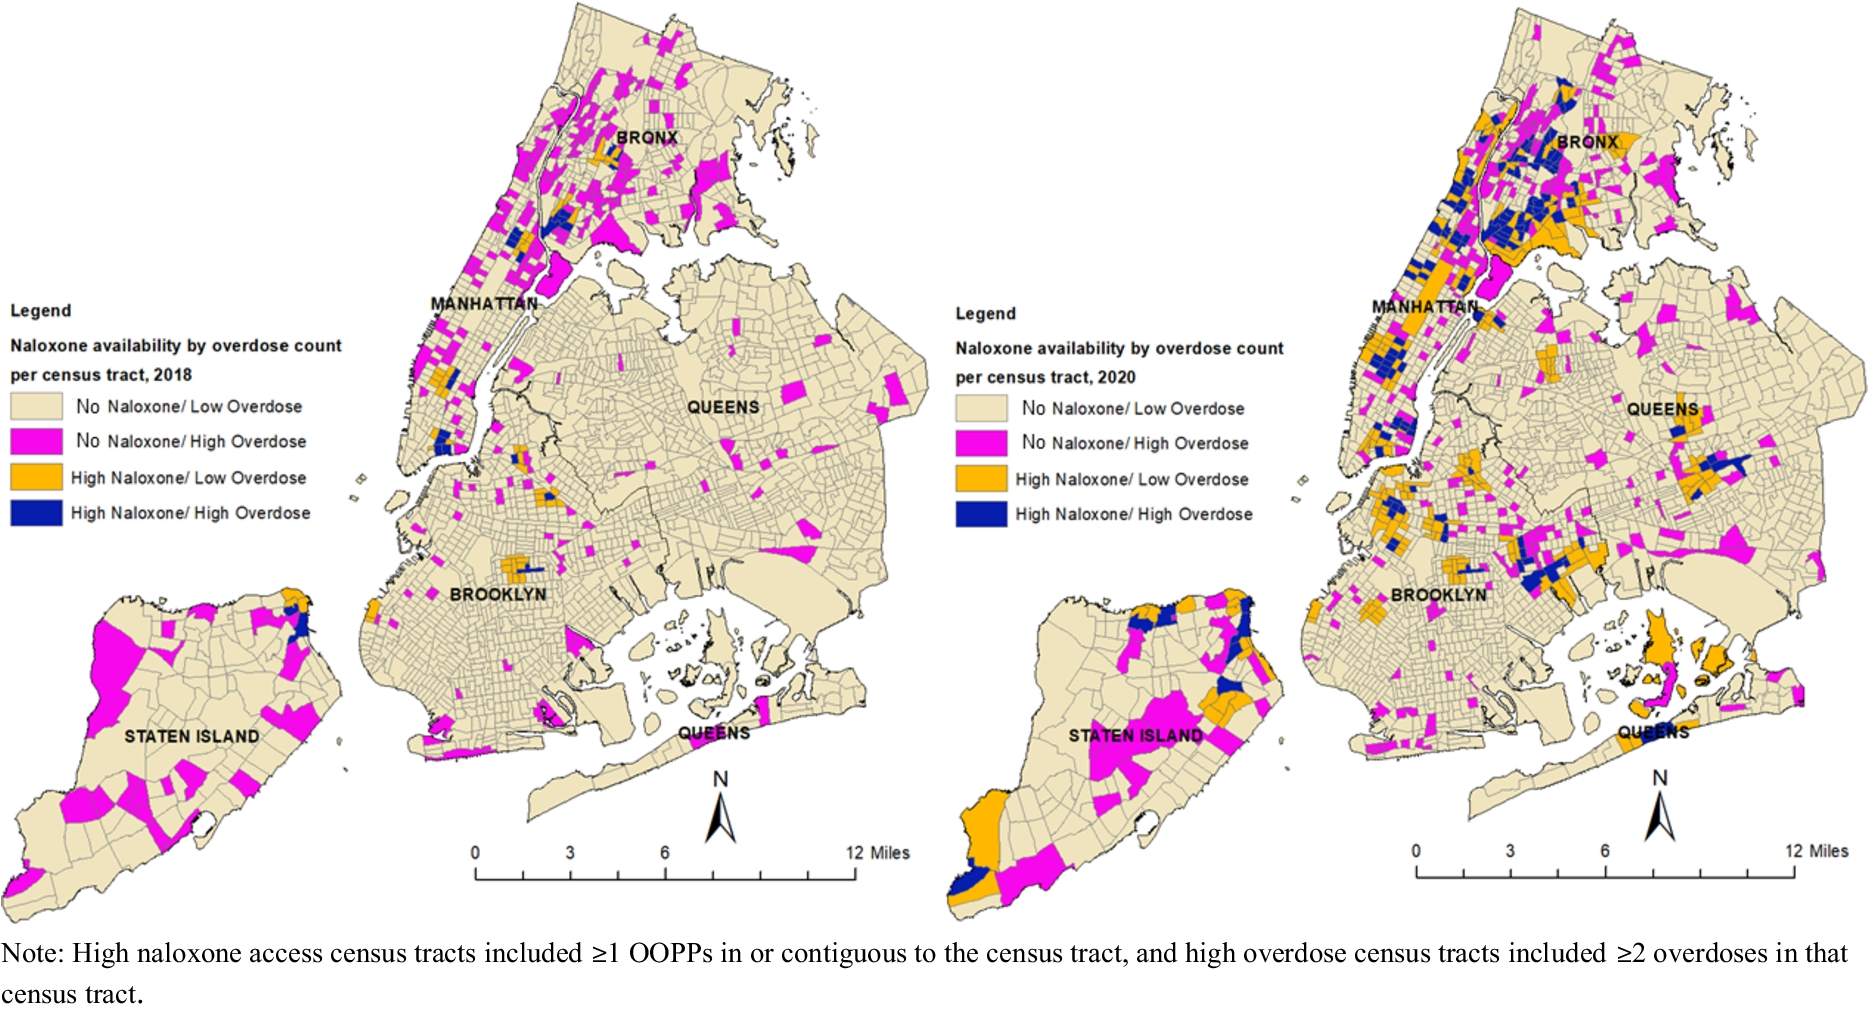 Neighborhood and Individual Disparities in Community-Based Naloxone Access for Opioid Overdose Prevention